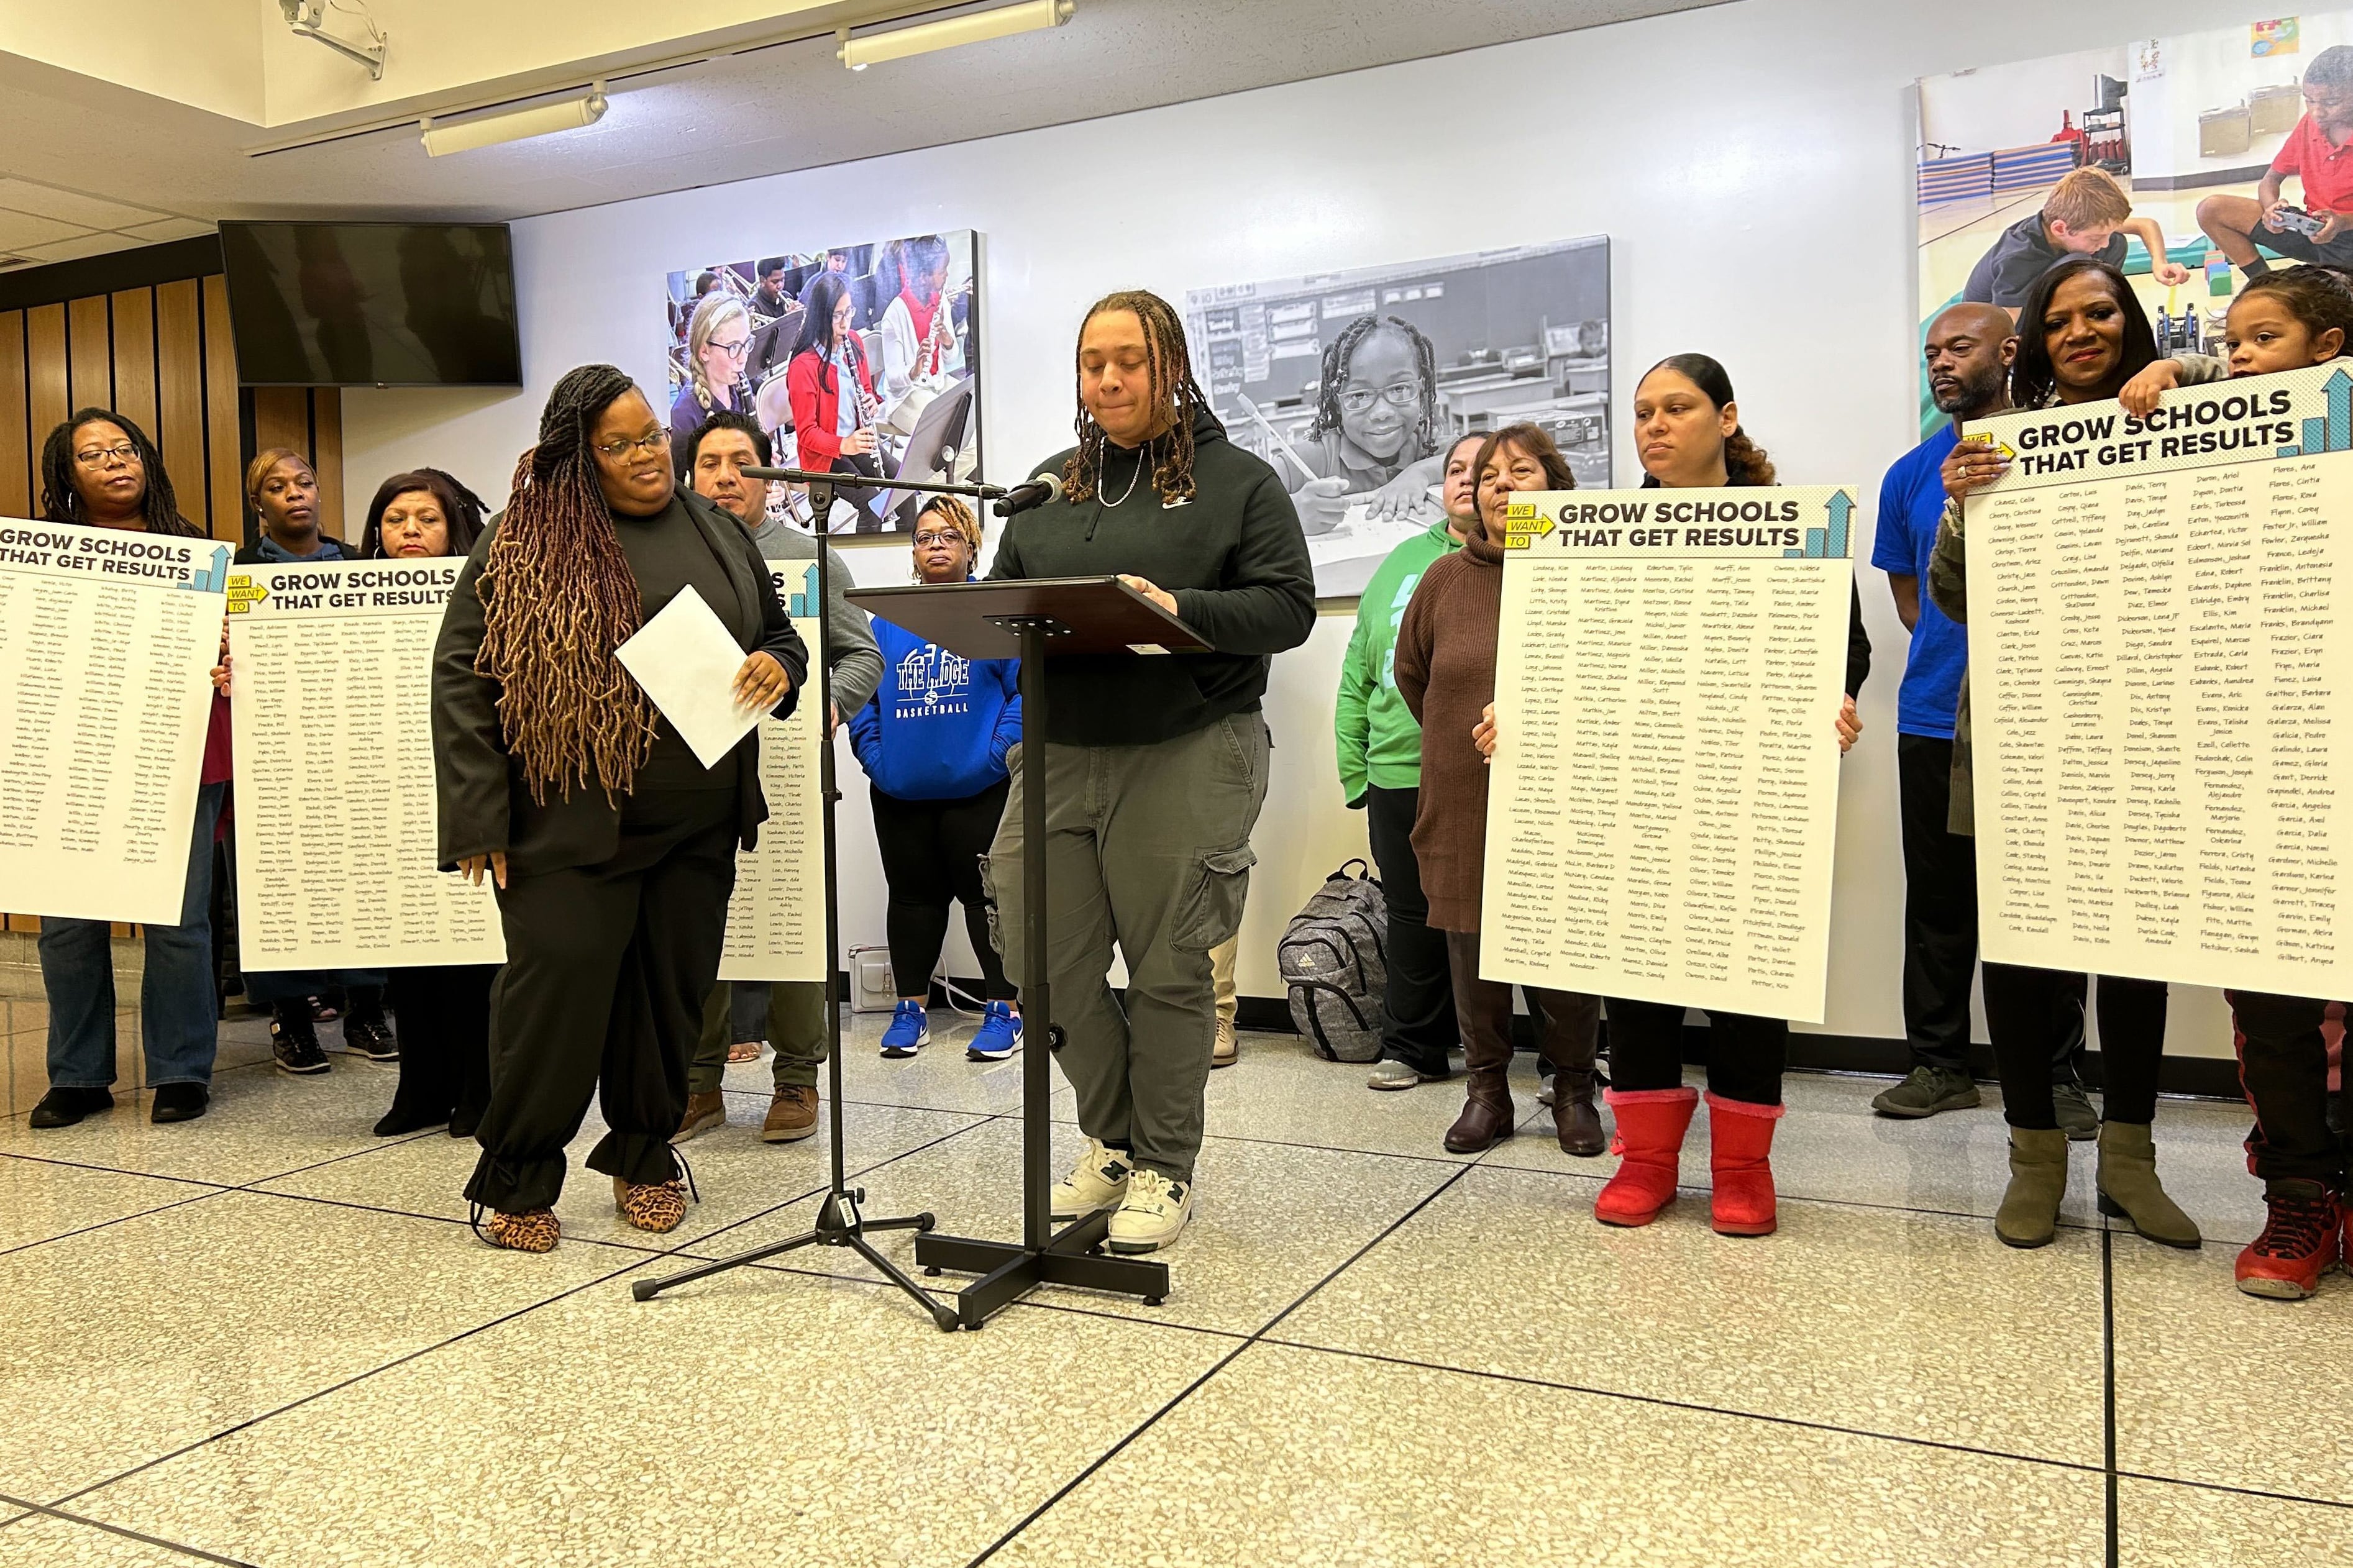 A student with long braids and wearing a black sweater stands at a podium while a group of people stand in the background holding up signs.